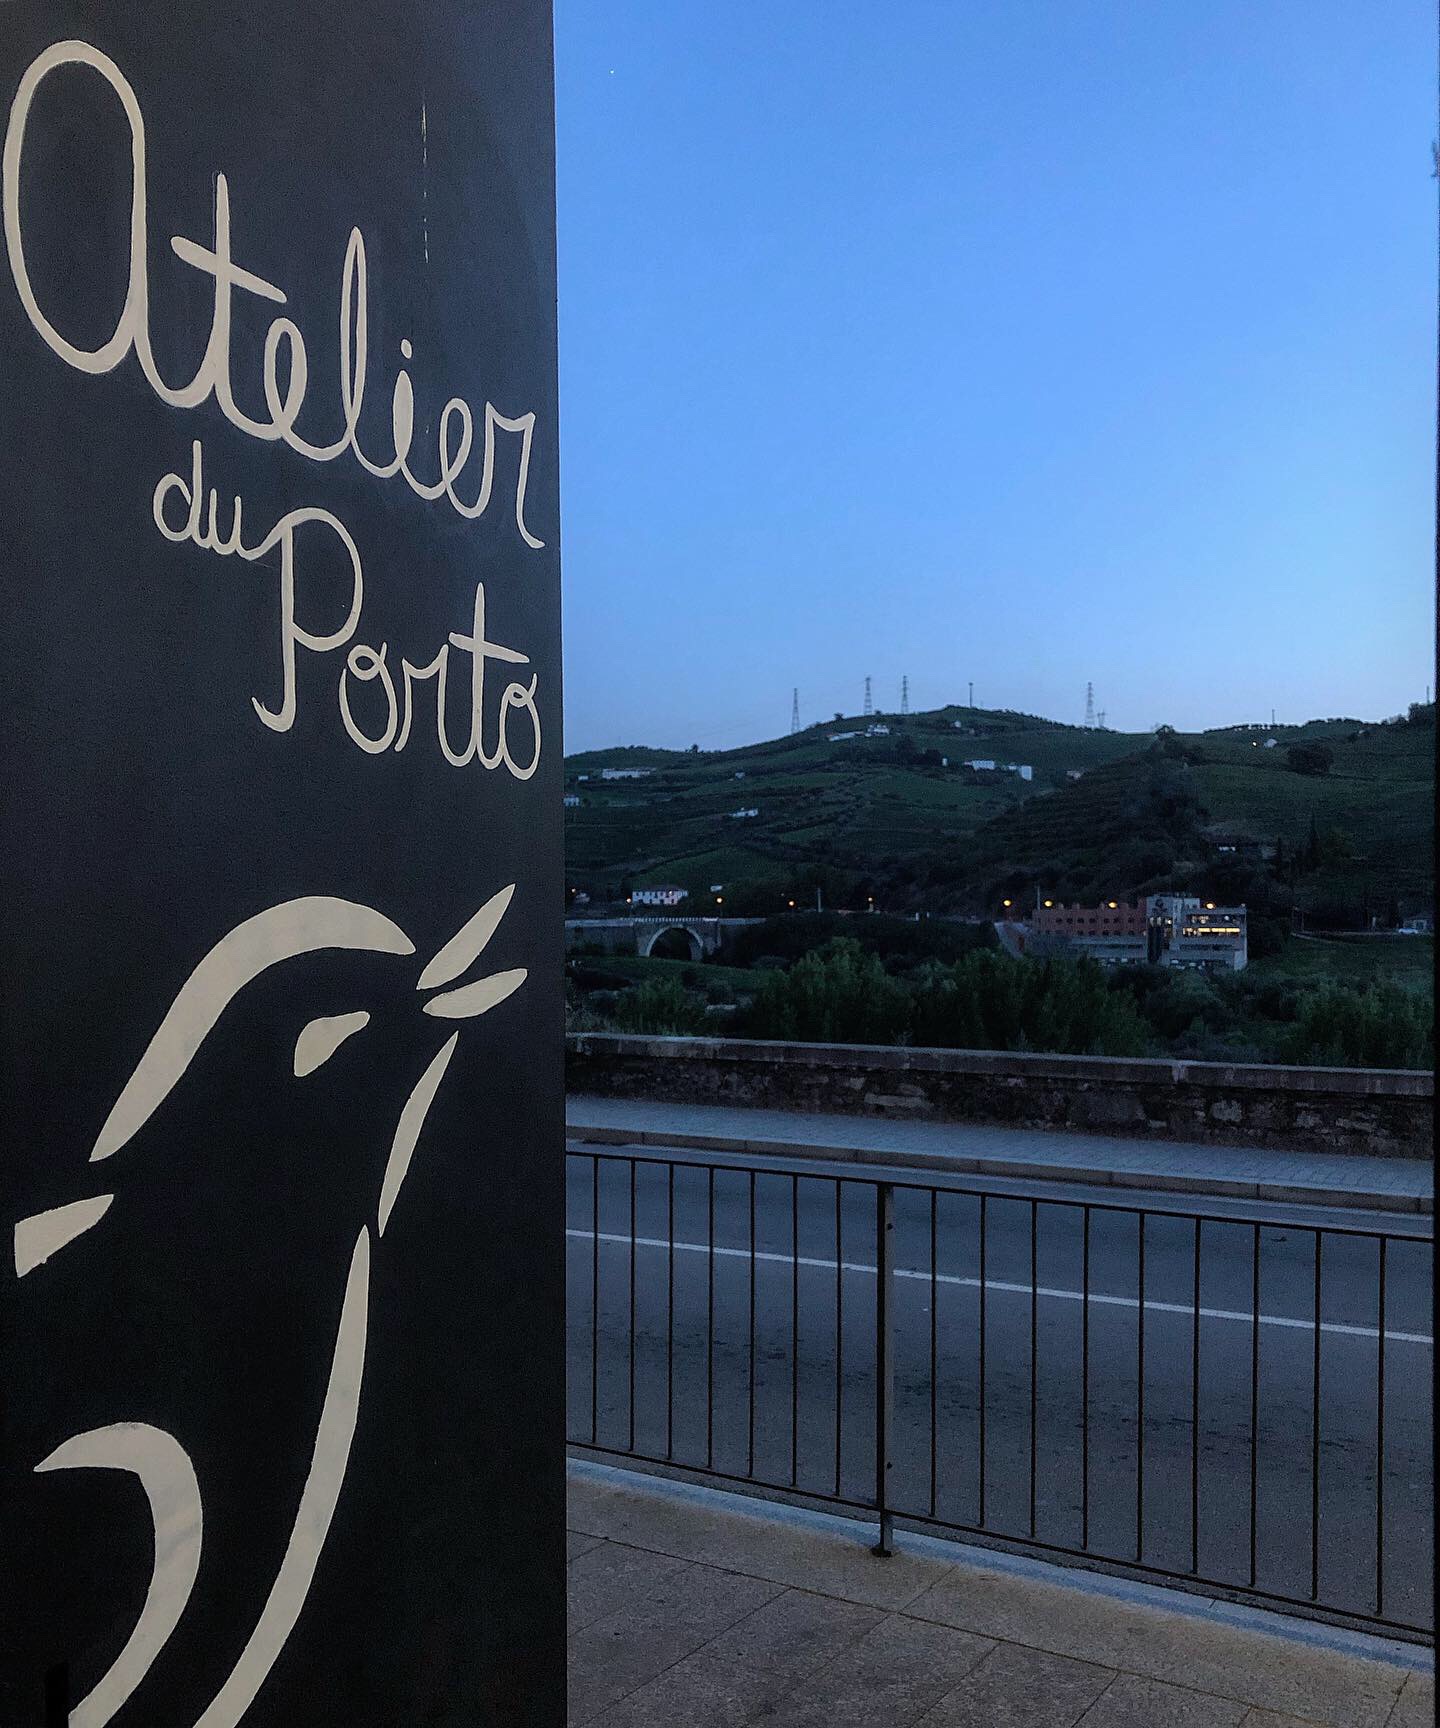  Tedo Tastings at Atelier do Porto next to Regua train station - open for In-depth tastings, chocolate and cheese pairings or even a scoop of Ruby Port or almond ice cream on the esplanade. 